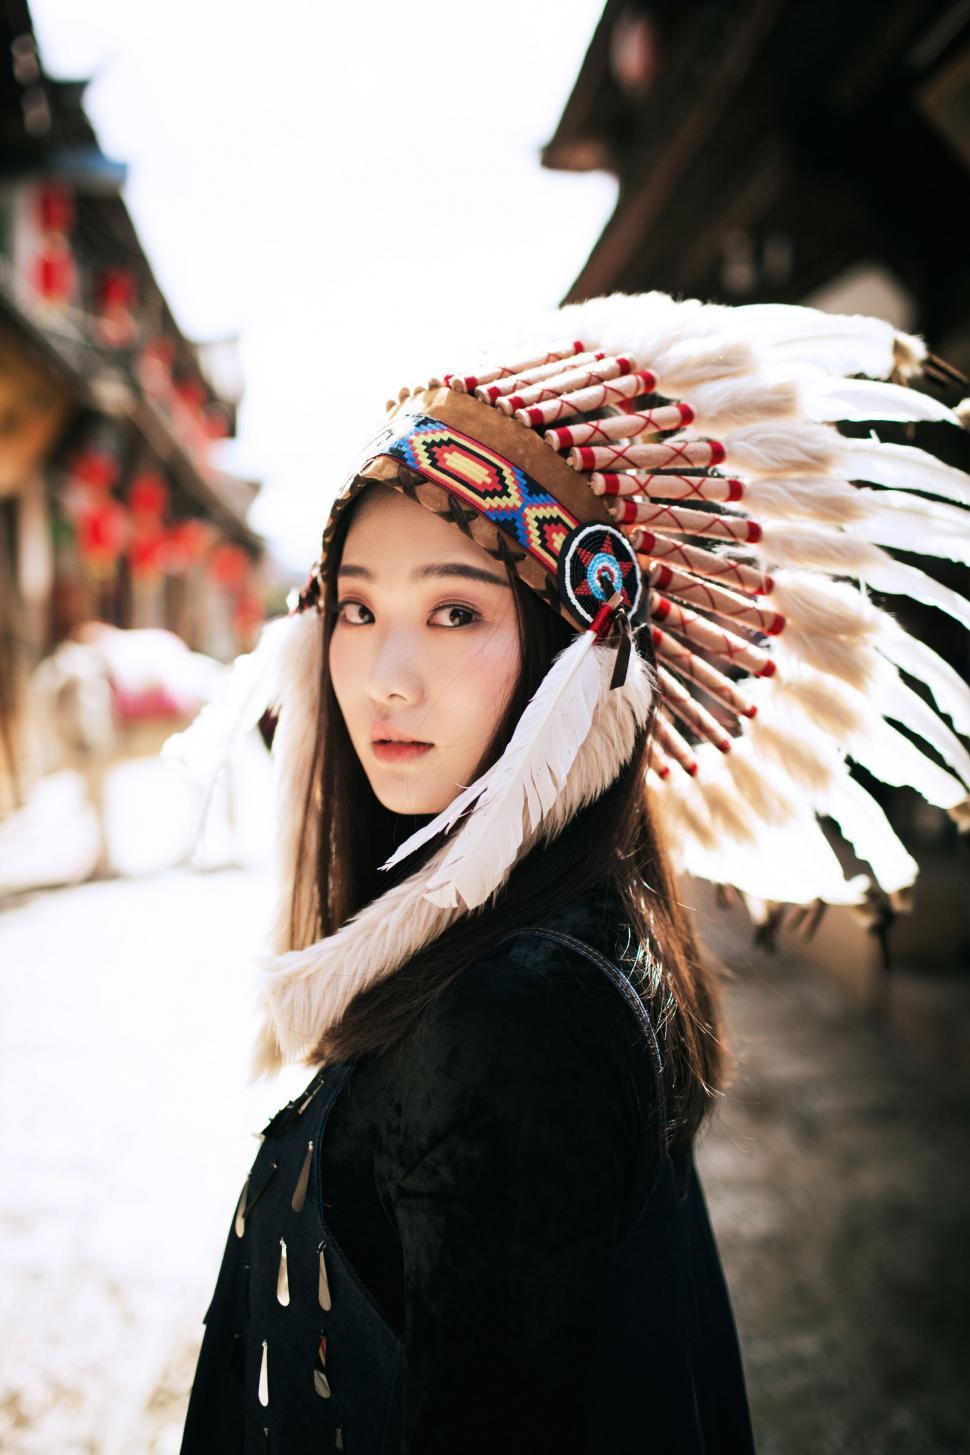 Free Image of Woman Wearing a Feather Headdress 